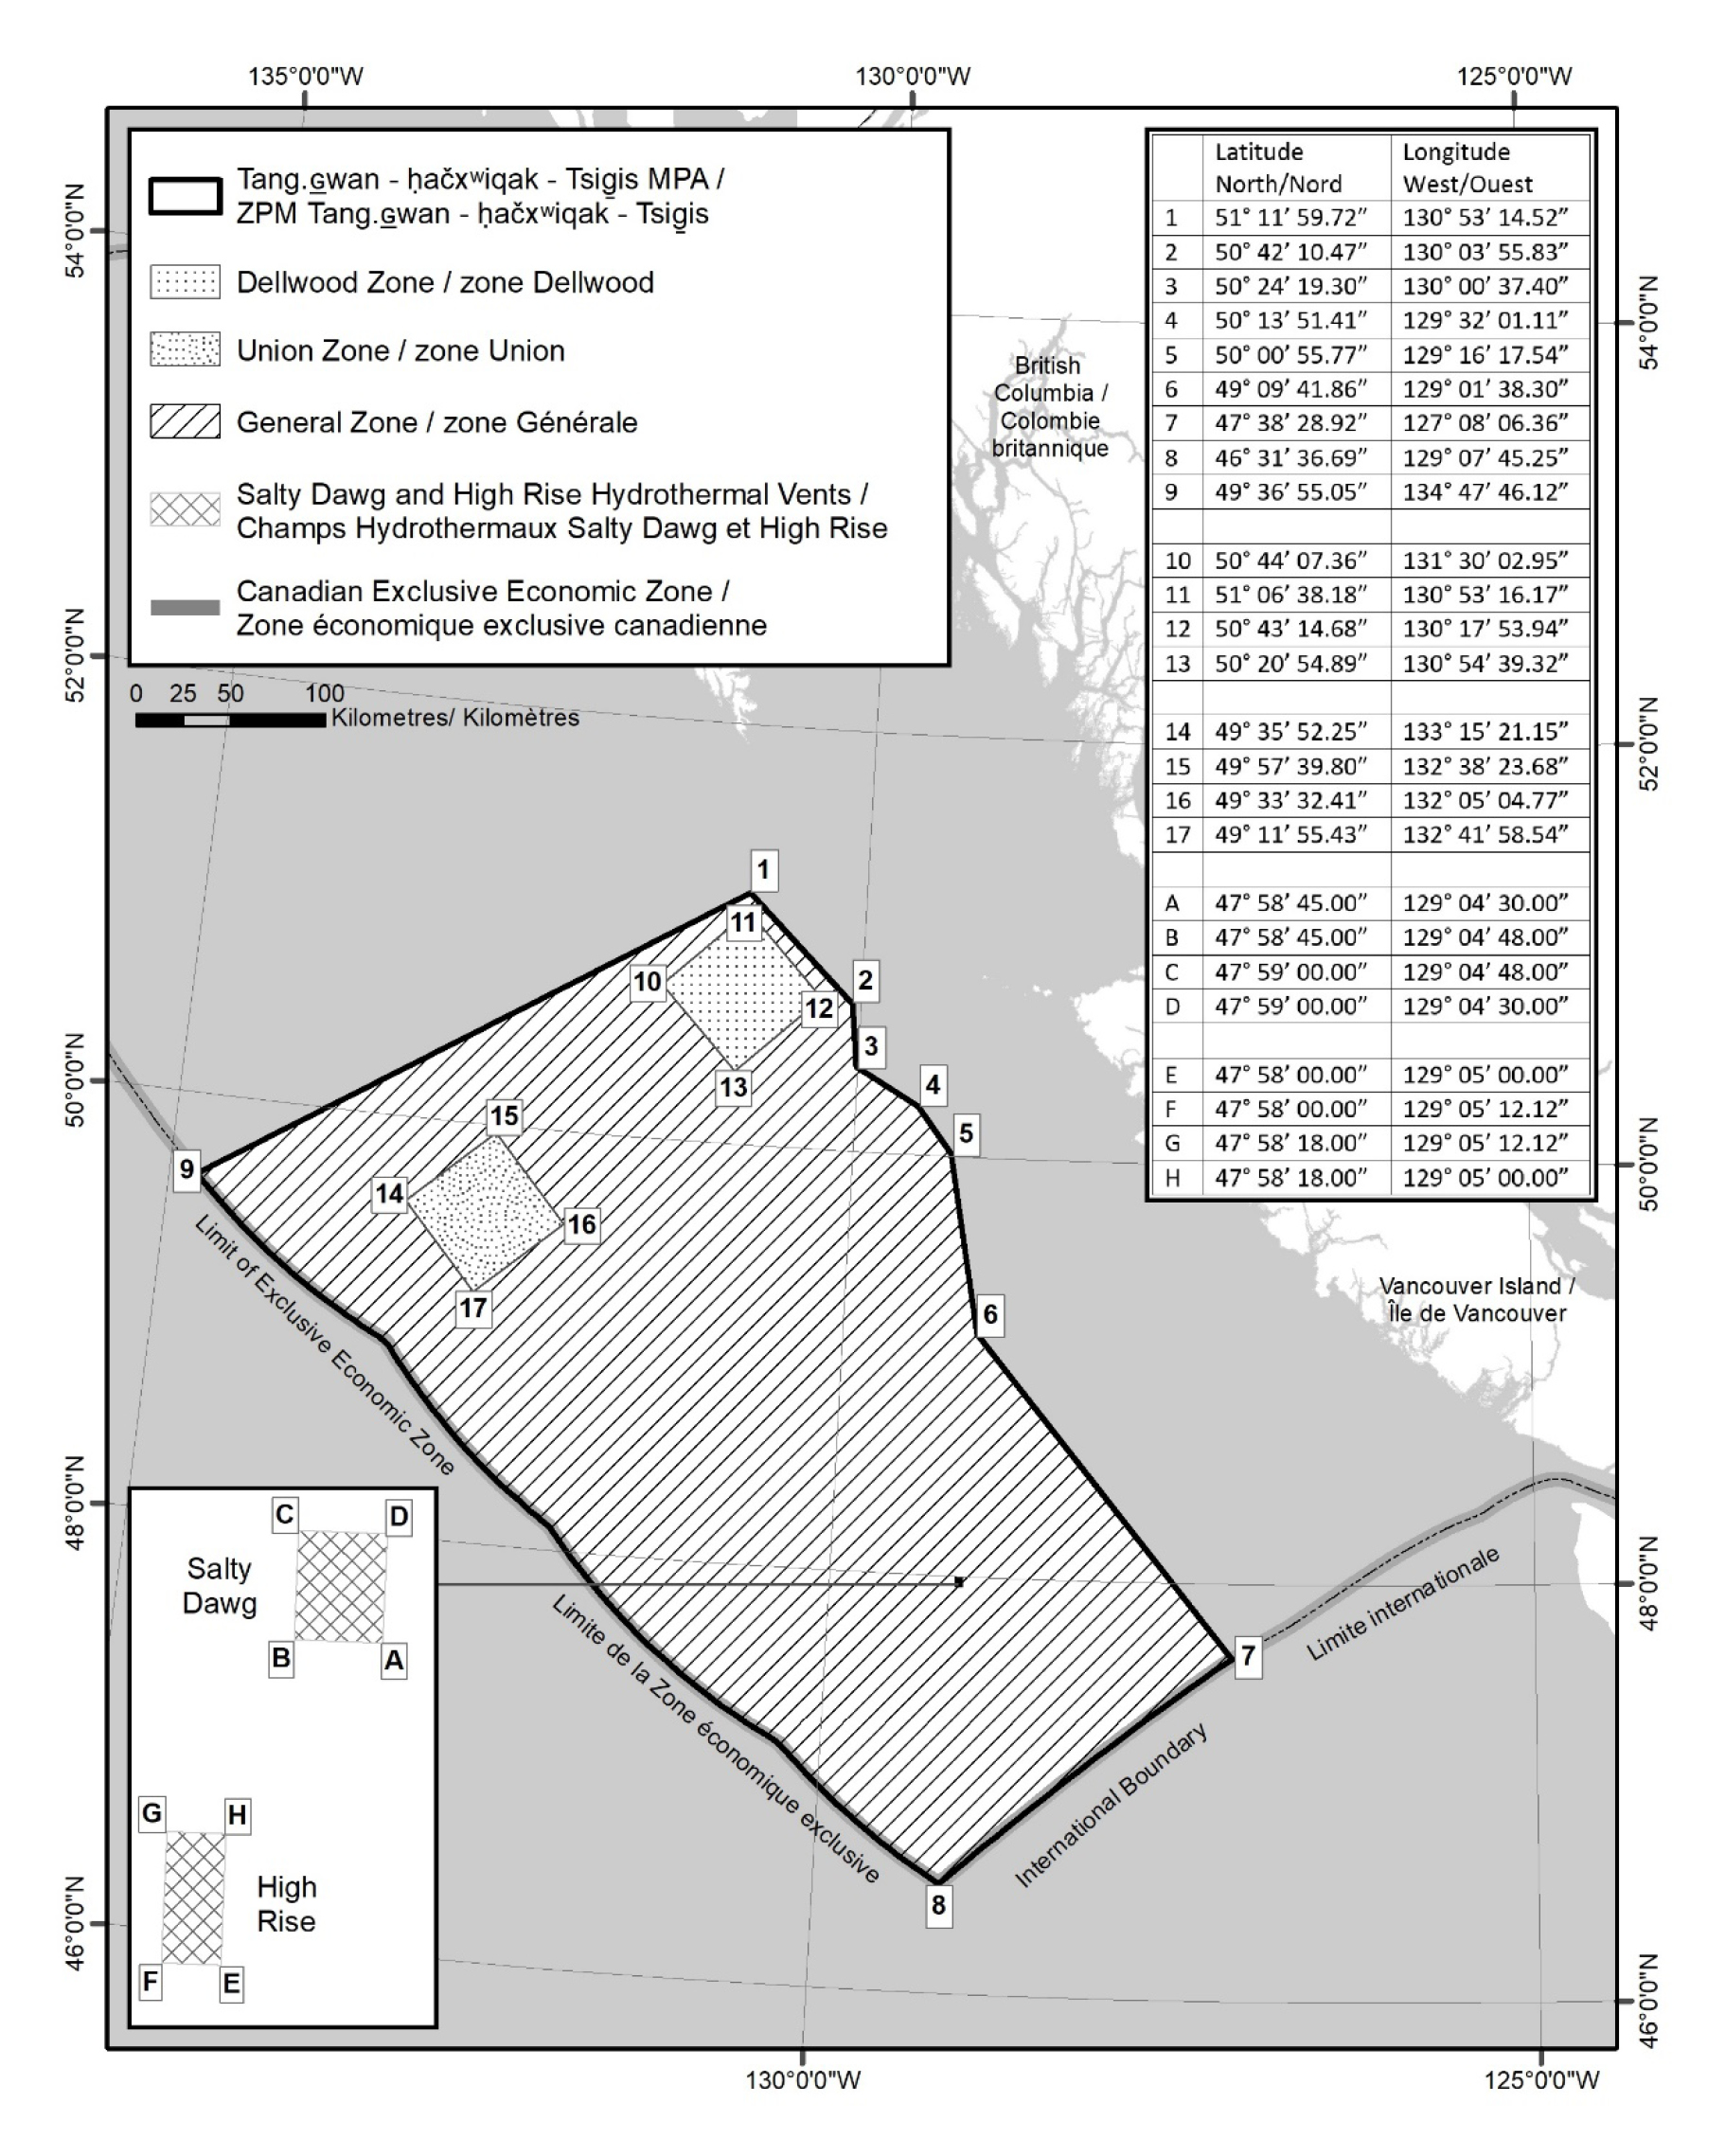 Proposed MPA boundary with geographic coordinates and proposed zoning approach – a long description follows.